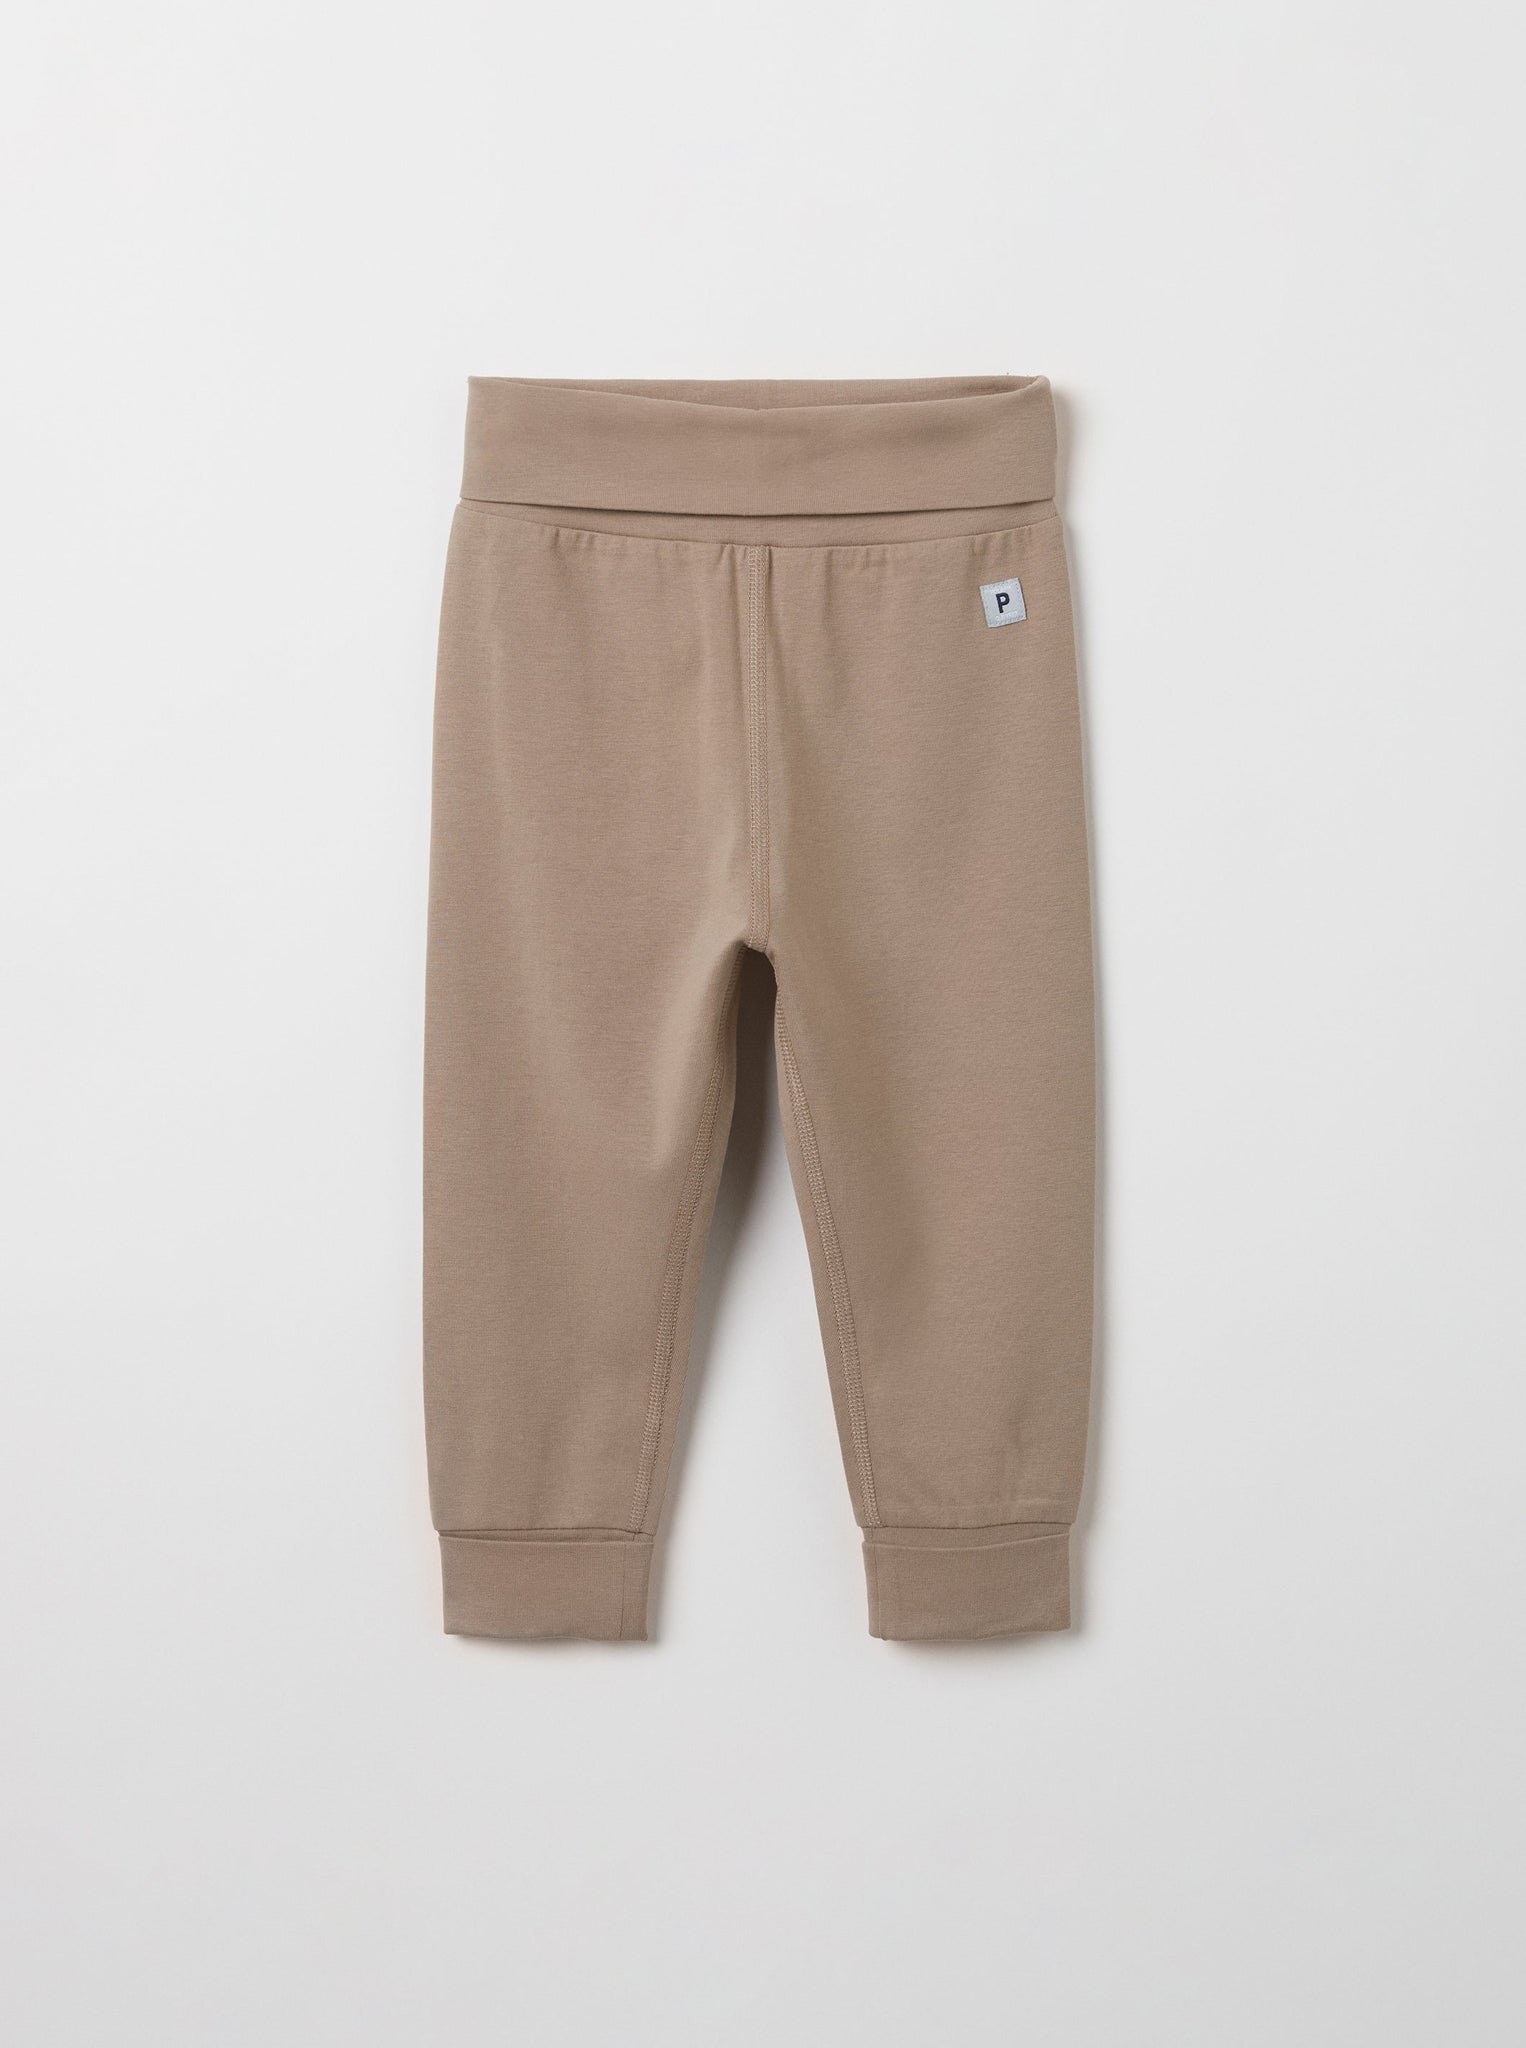 Brown Organic Cotton Baby Leggings from the Polarn O. Pyret babywear collection. Ethically produced kids clothing.